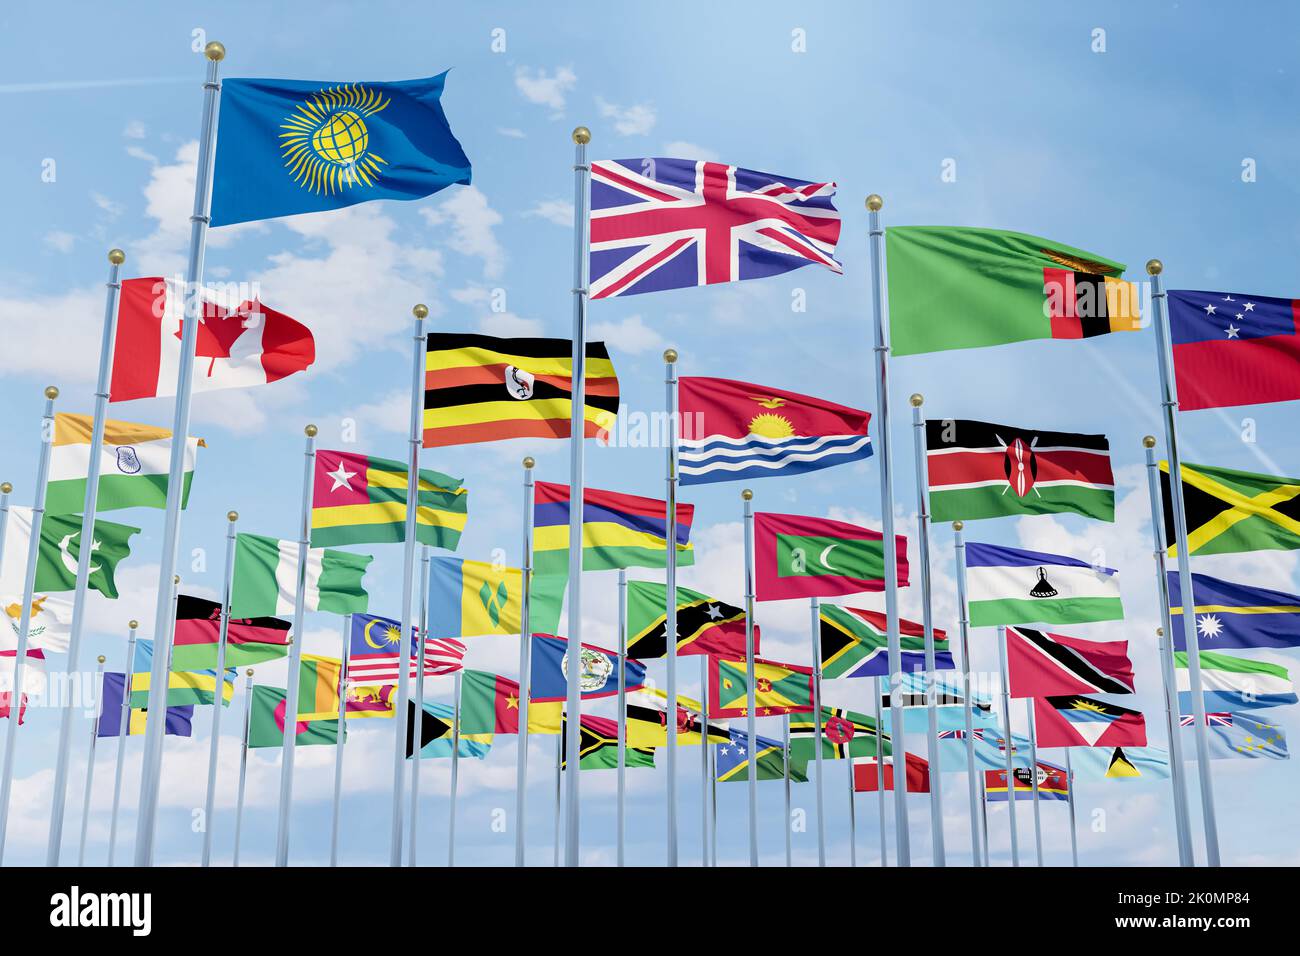 The flag of the Commonwealth of Nations with the flags of the organization's countries along with the flag of Britain ,Close-up Stock Photo